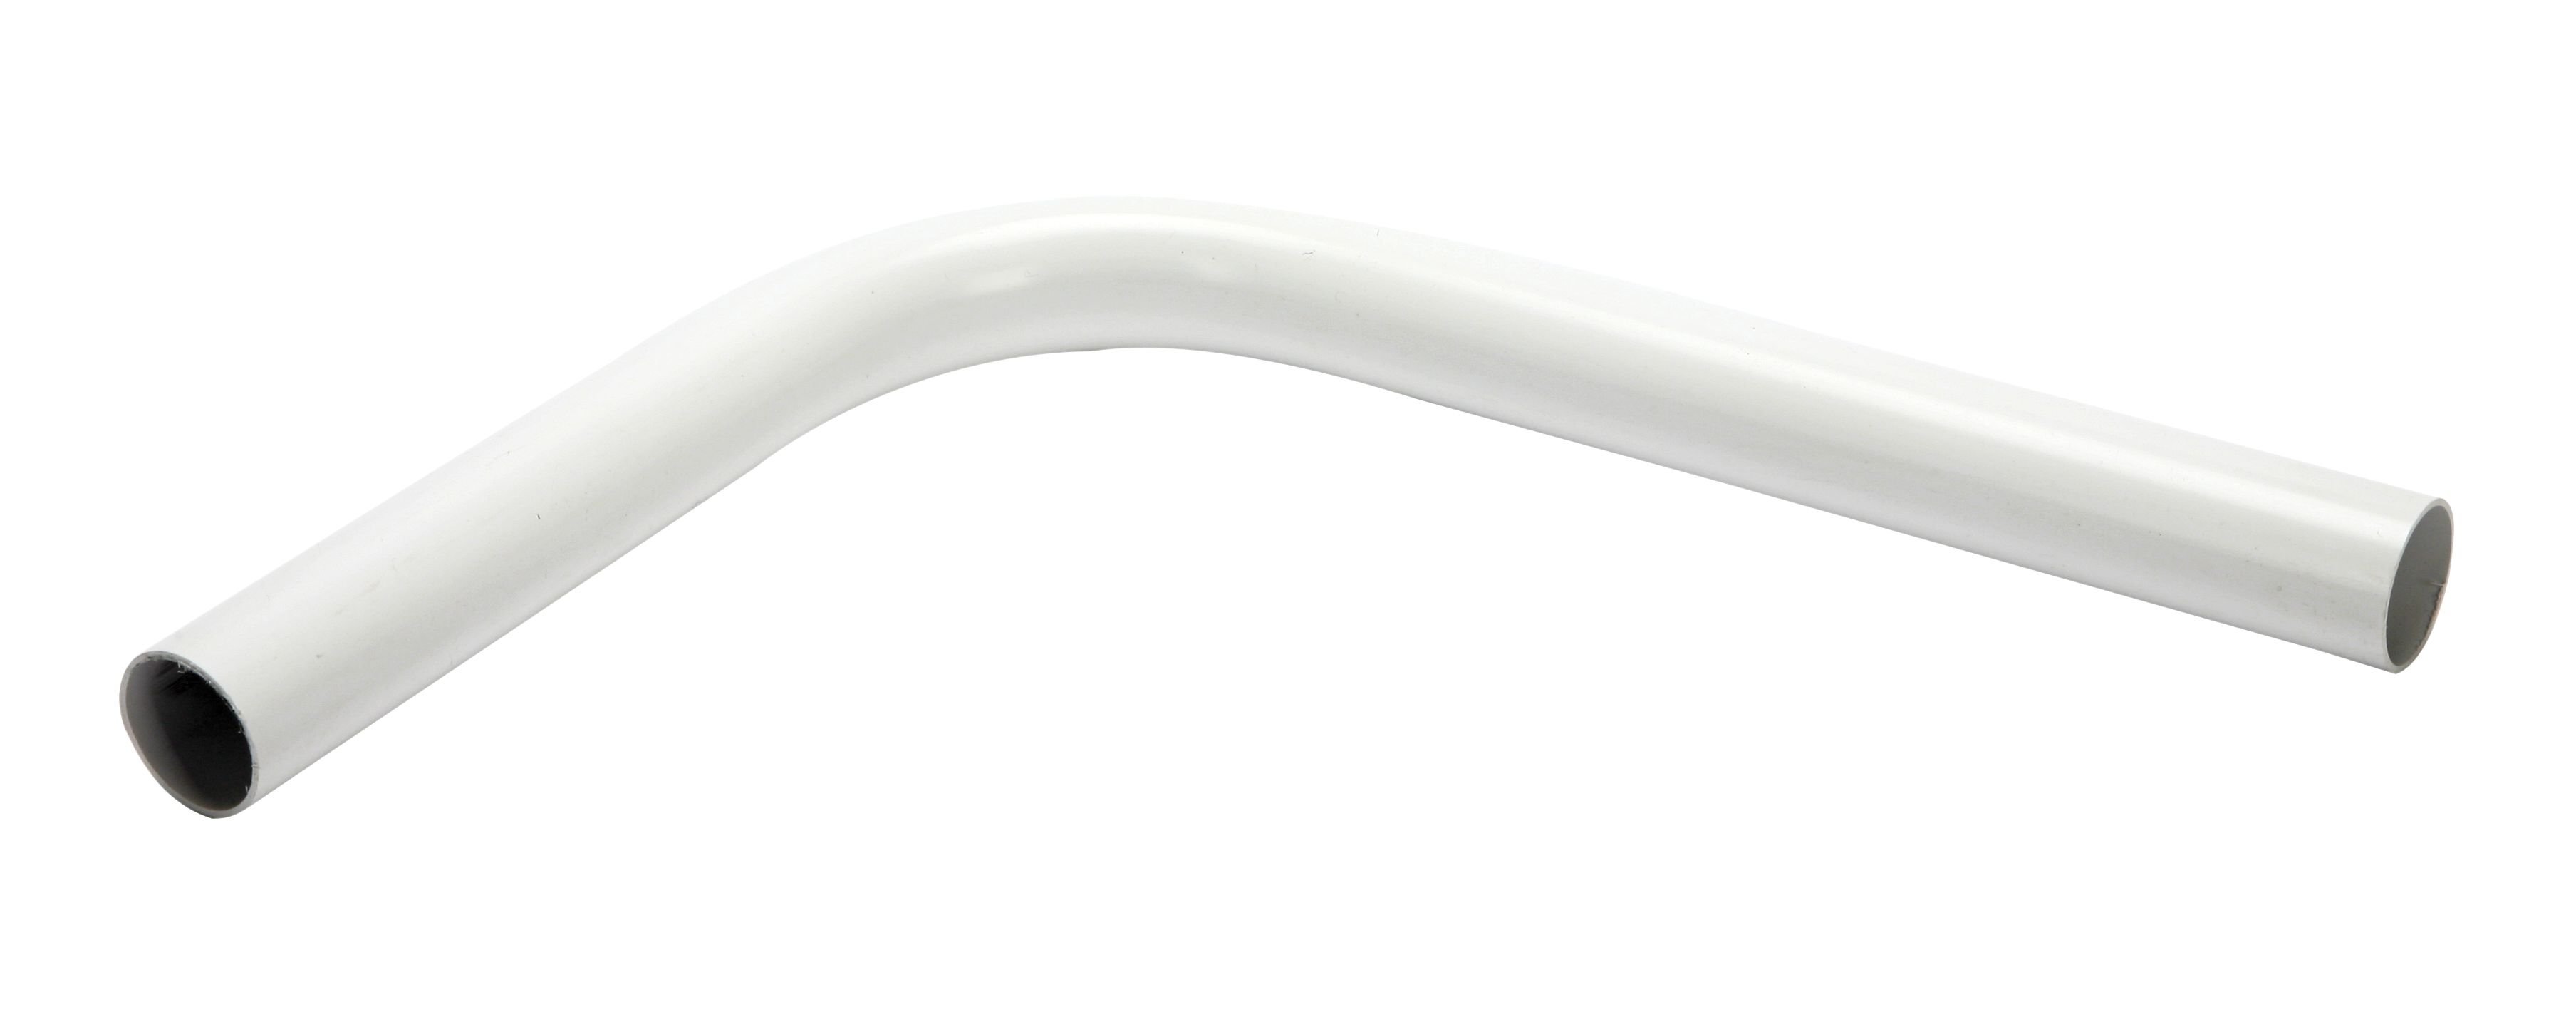 Image of Euroflo By Fluidmaster White Cistern Flushpipe - 14 x 9in